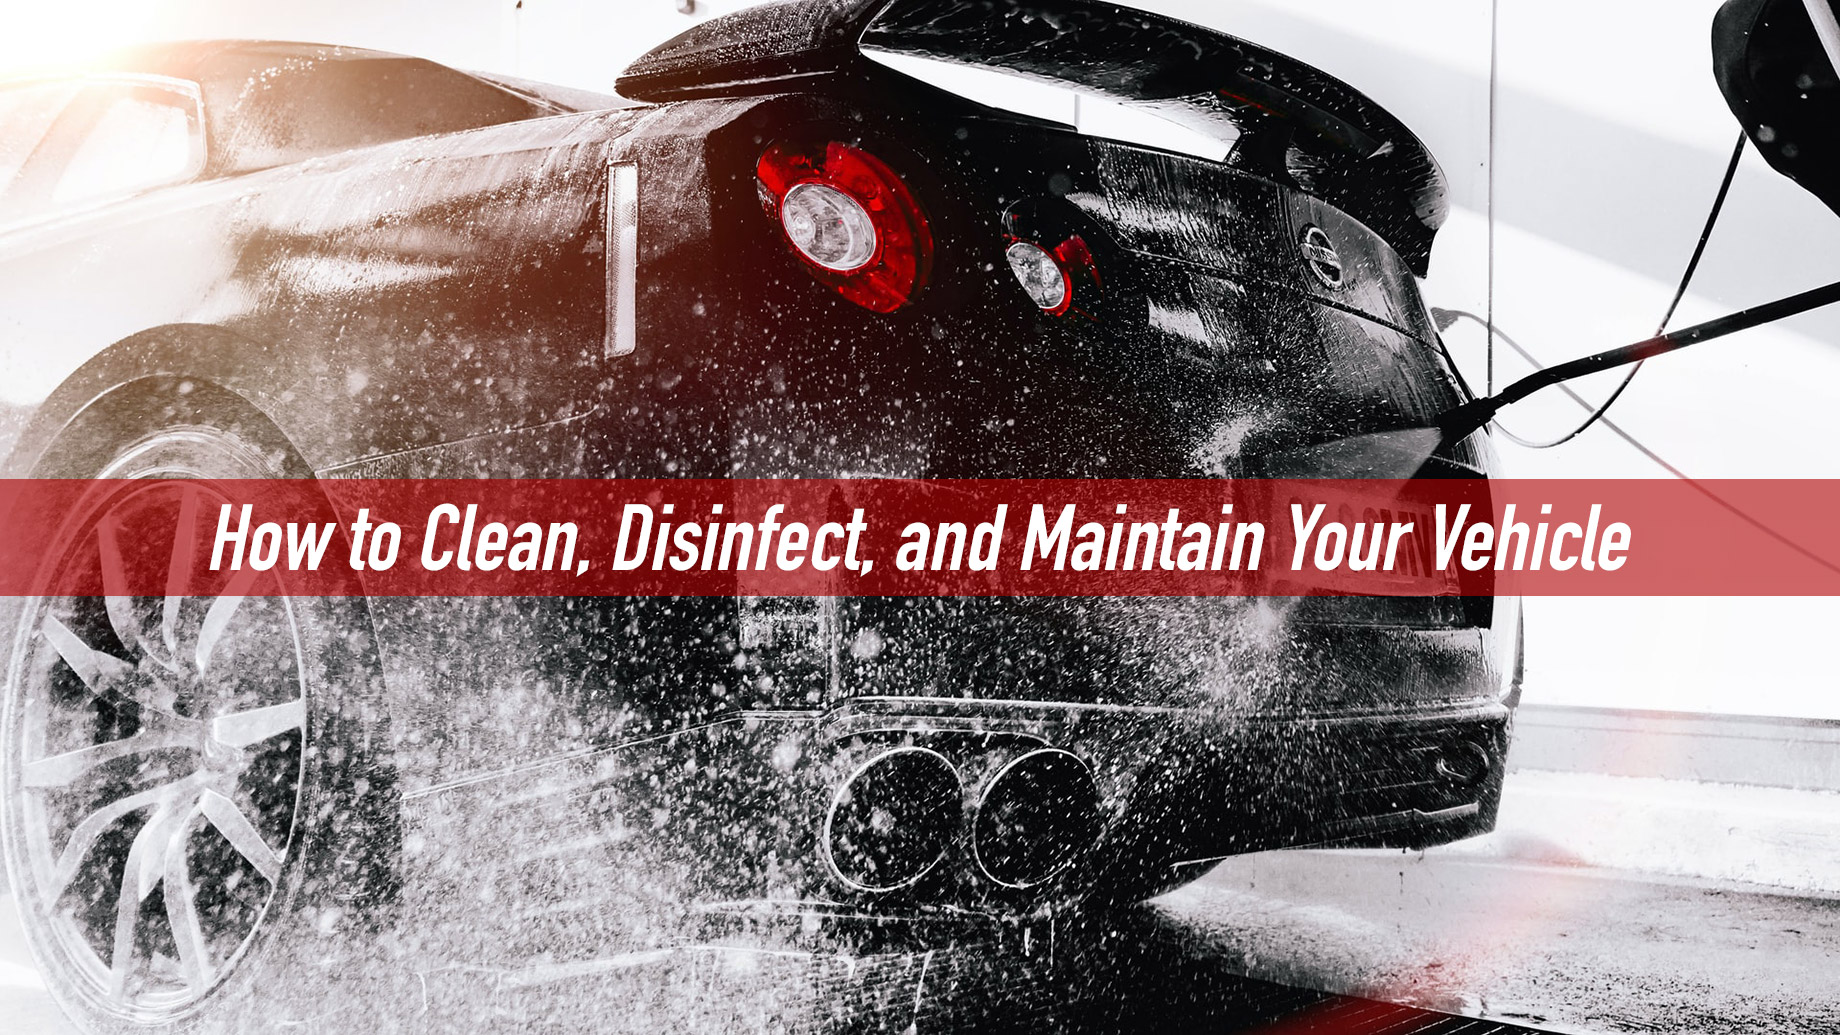 How to Clean, Disinfect, and Maintain Your Vehicle